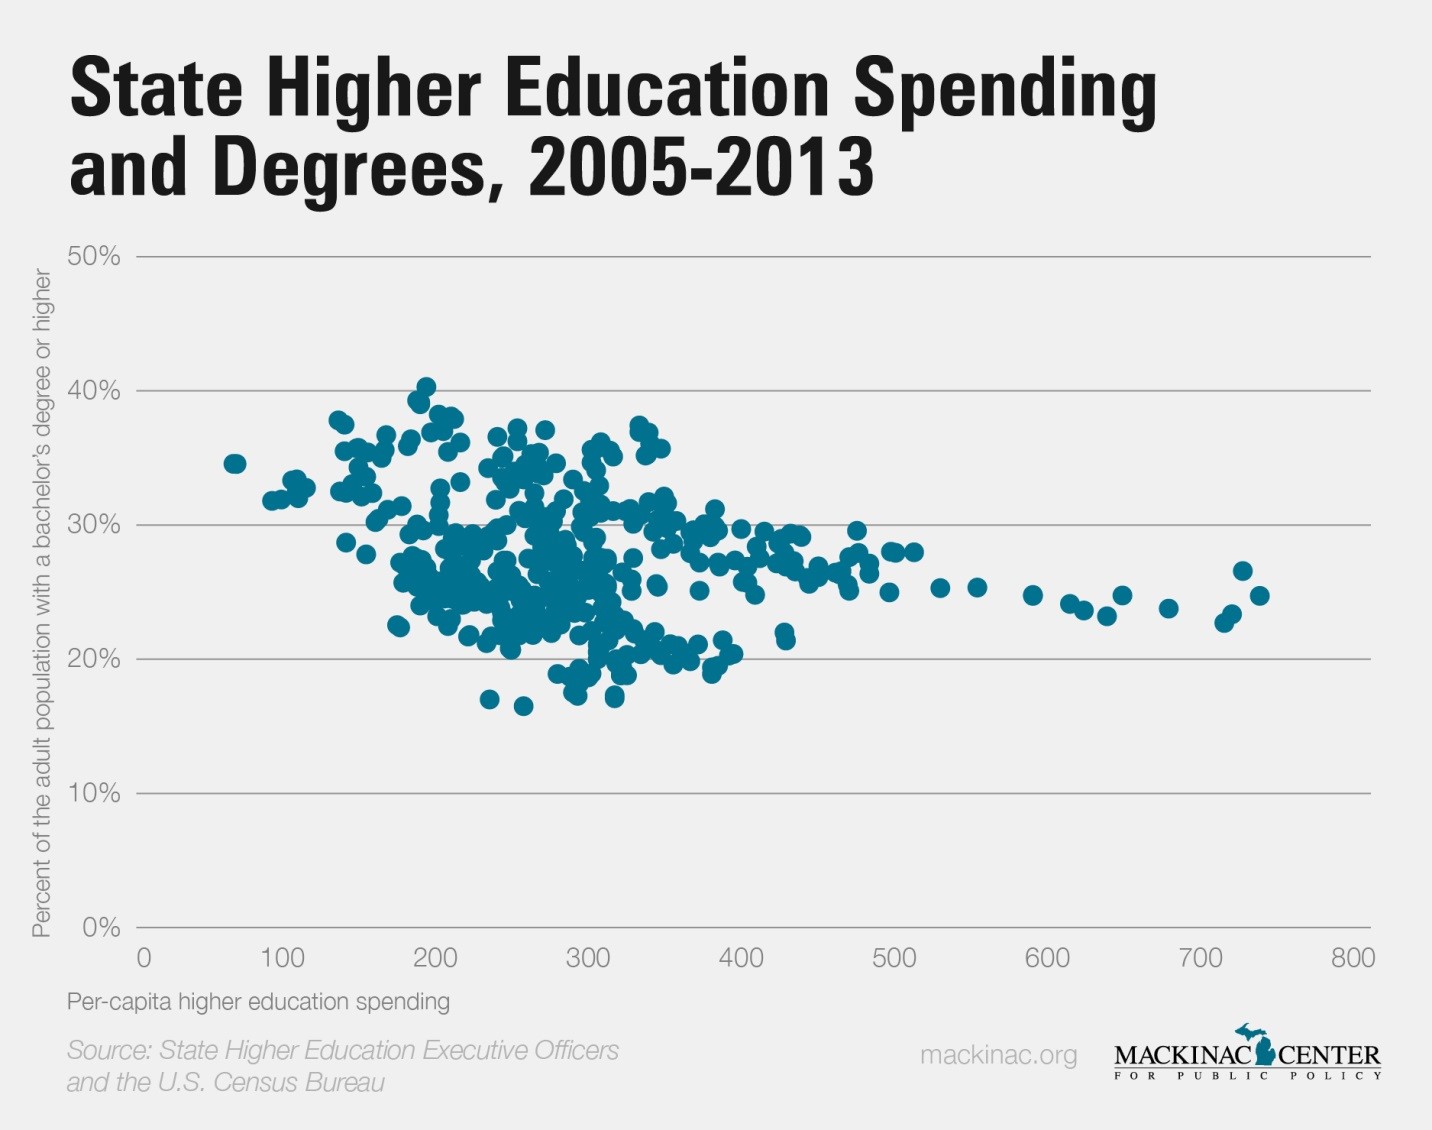 State Higher Education Spending and Degrees, 2005-2013